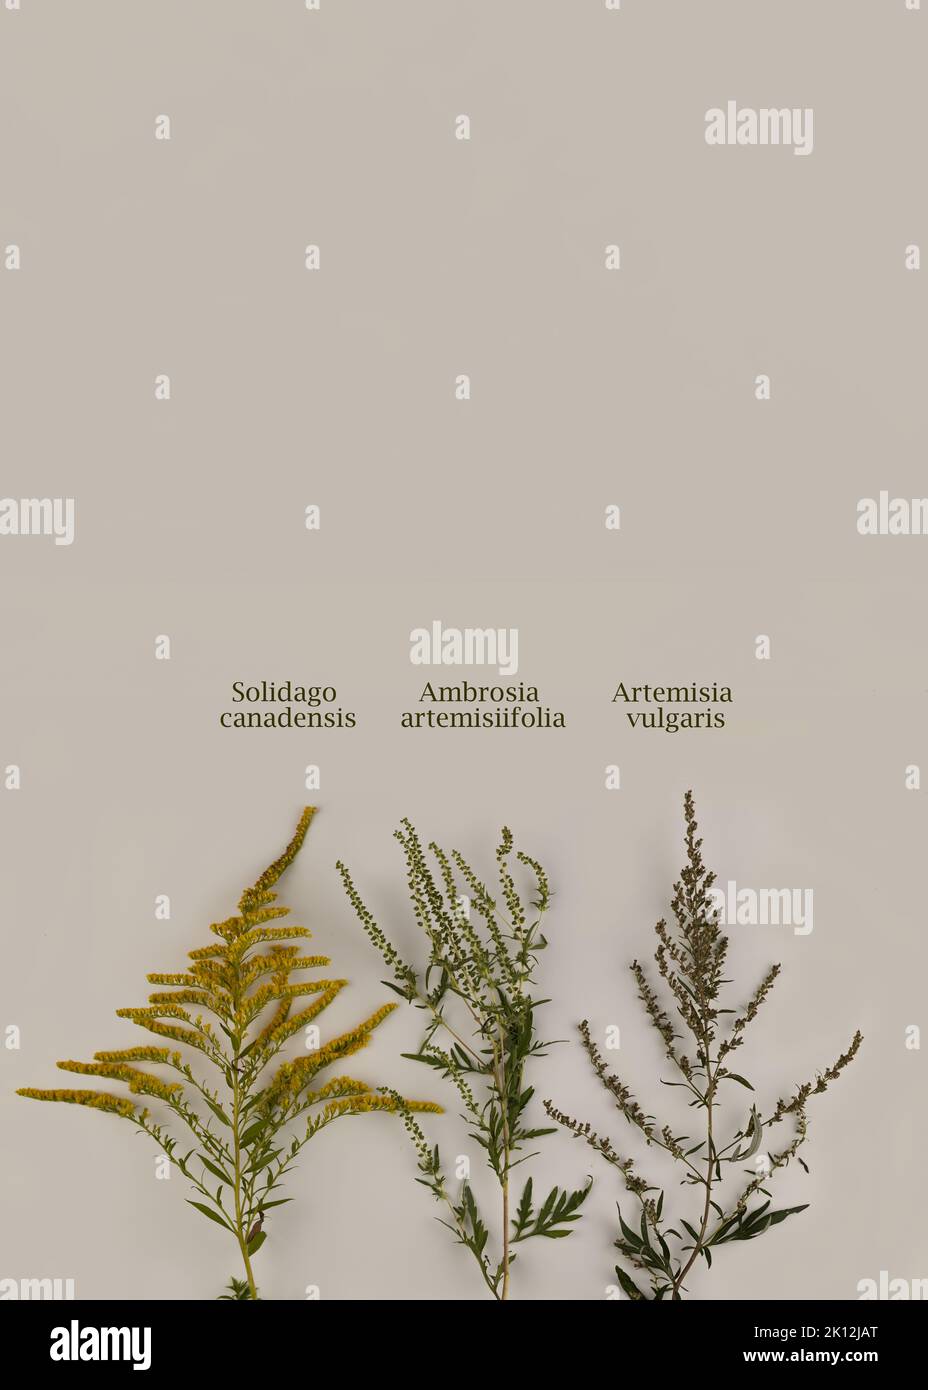 Comparison of ragweed, goldenrod and wormwood flowers. Blooming Ambrosia artemisiifolia is a dangerous allergenic plants, weed bushes pollen causes al Stock Photo